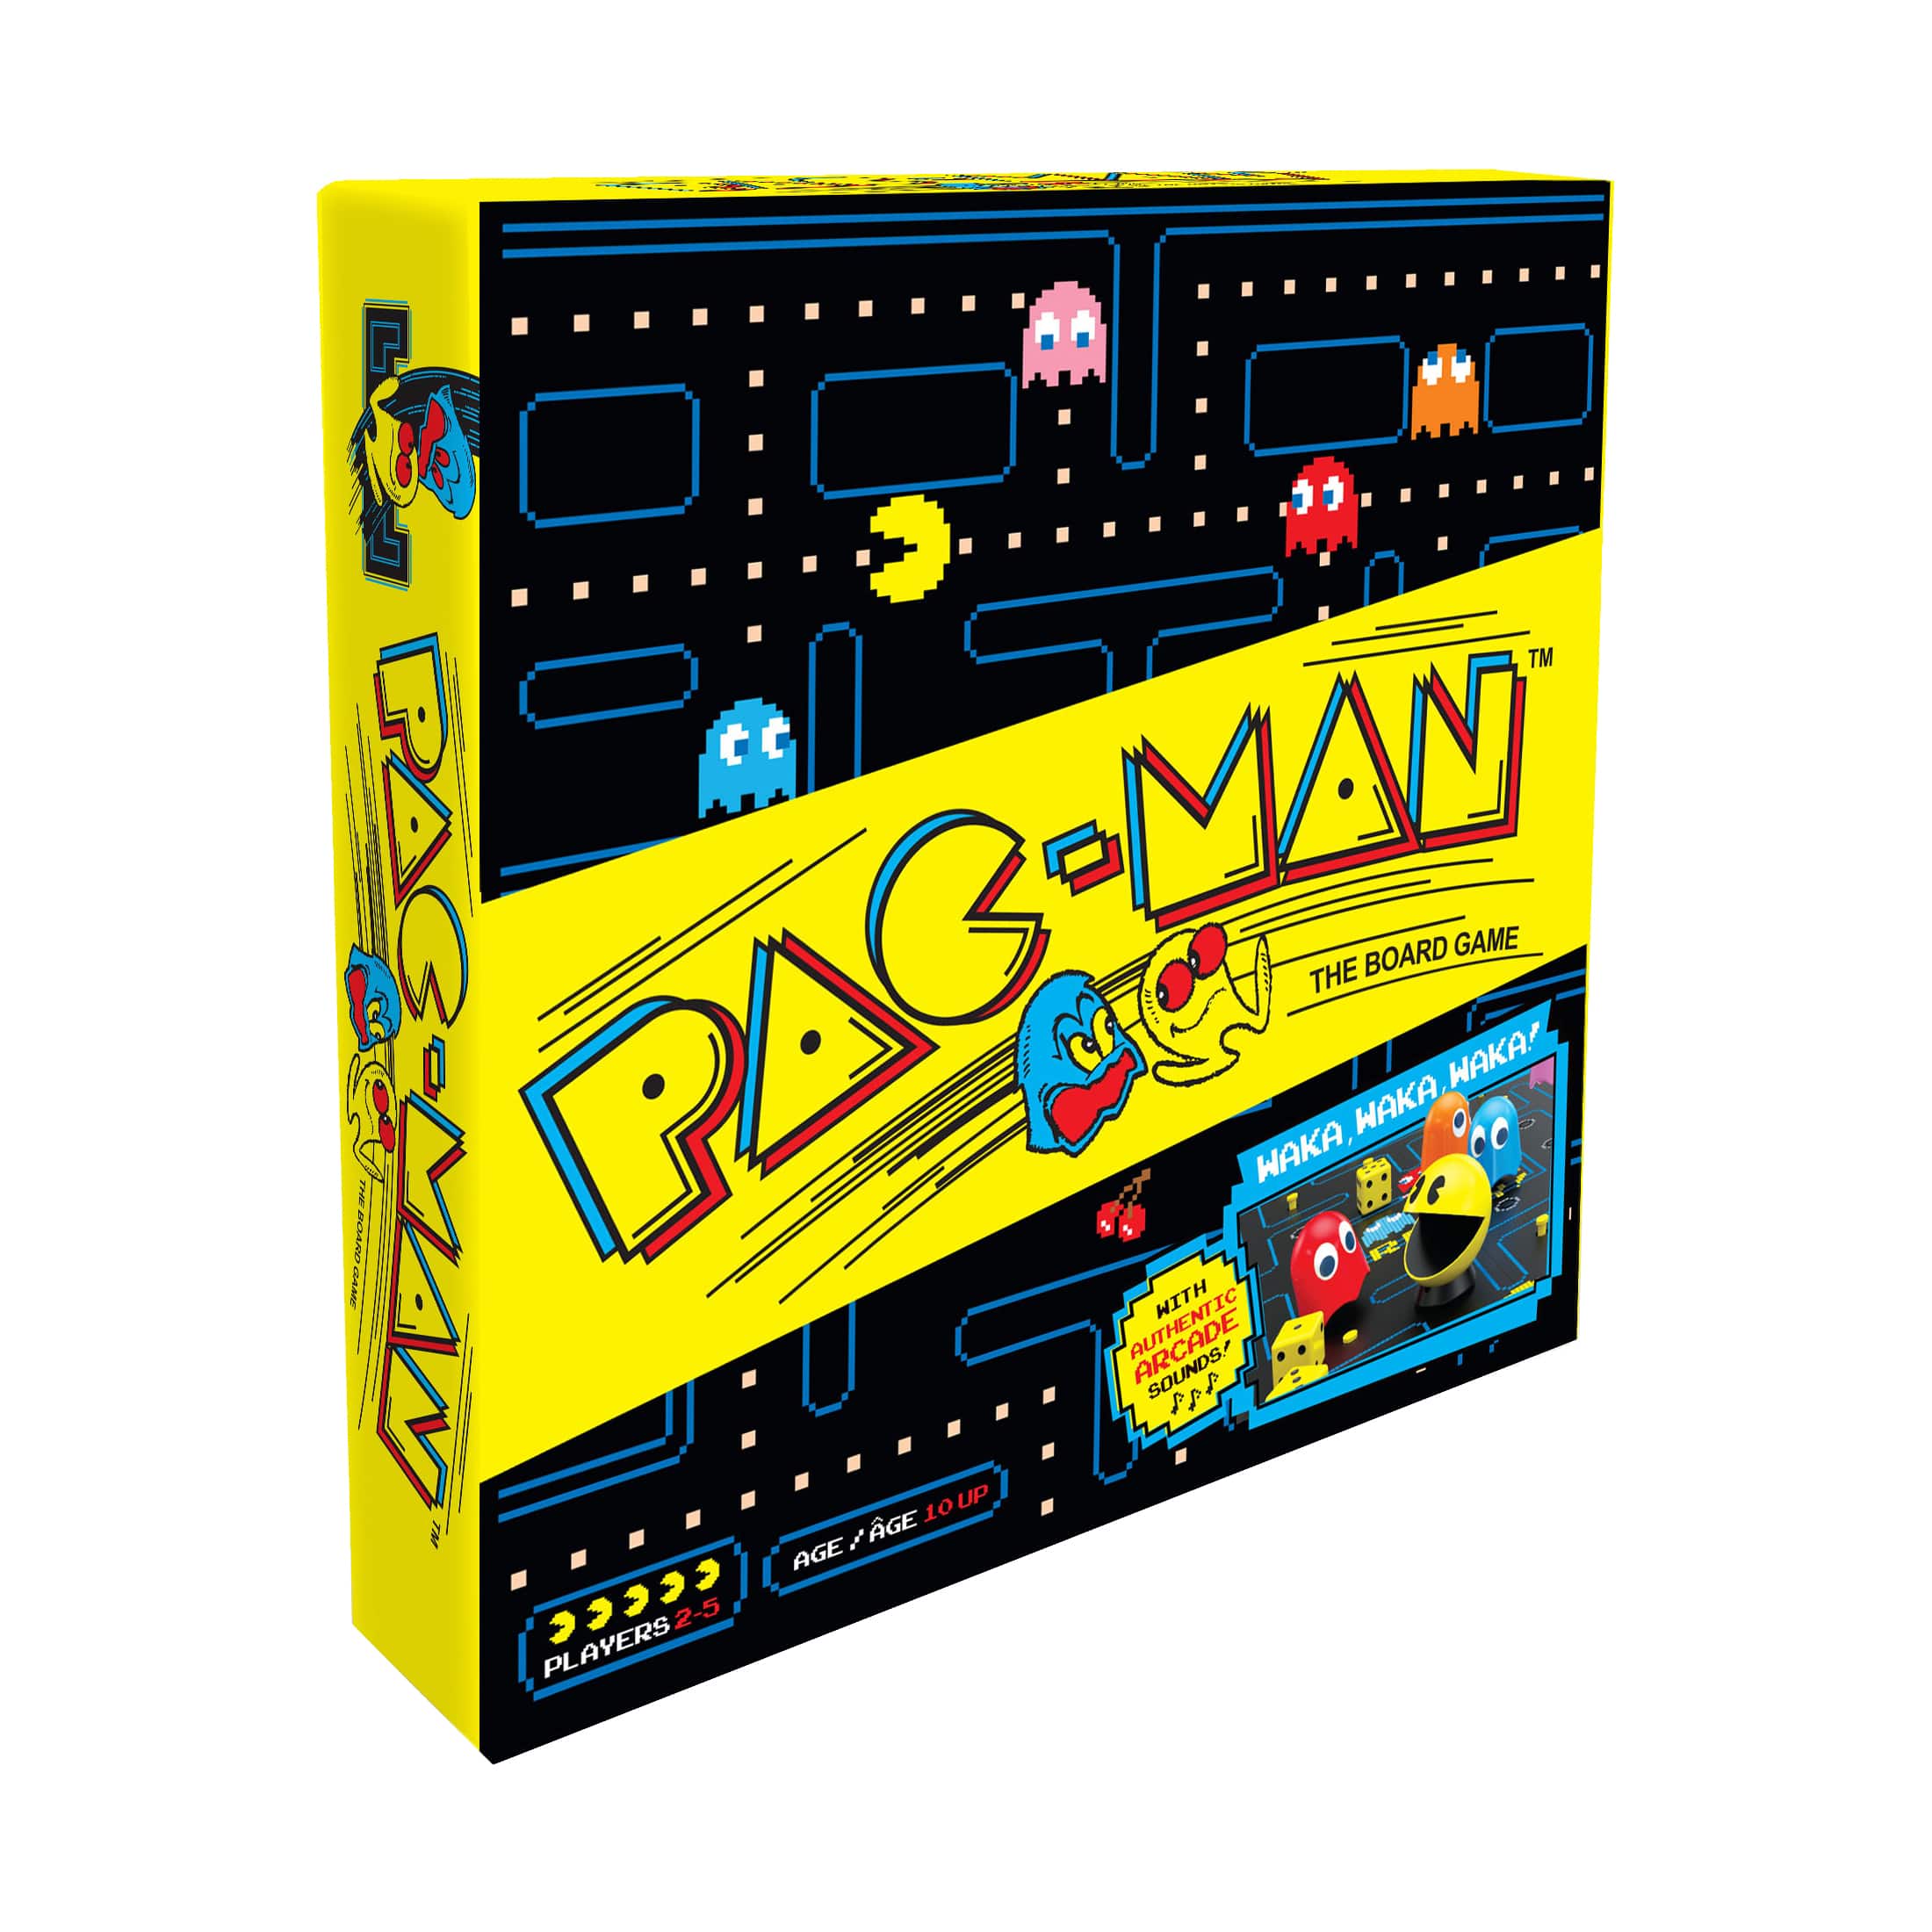 Grab these Pac-Man crochet kits before they're gobbled up - Polygon